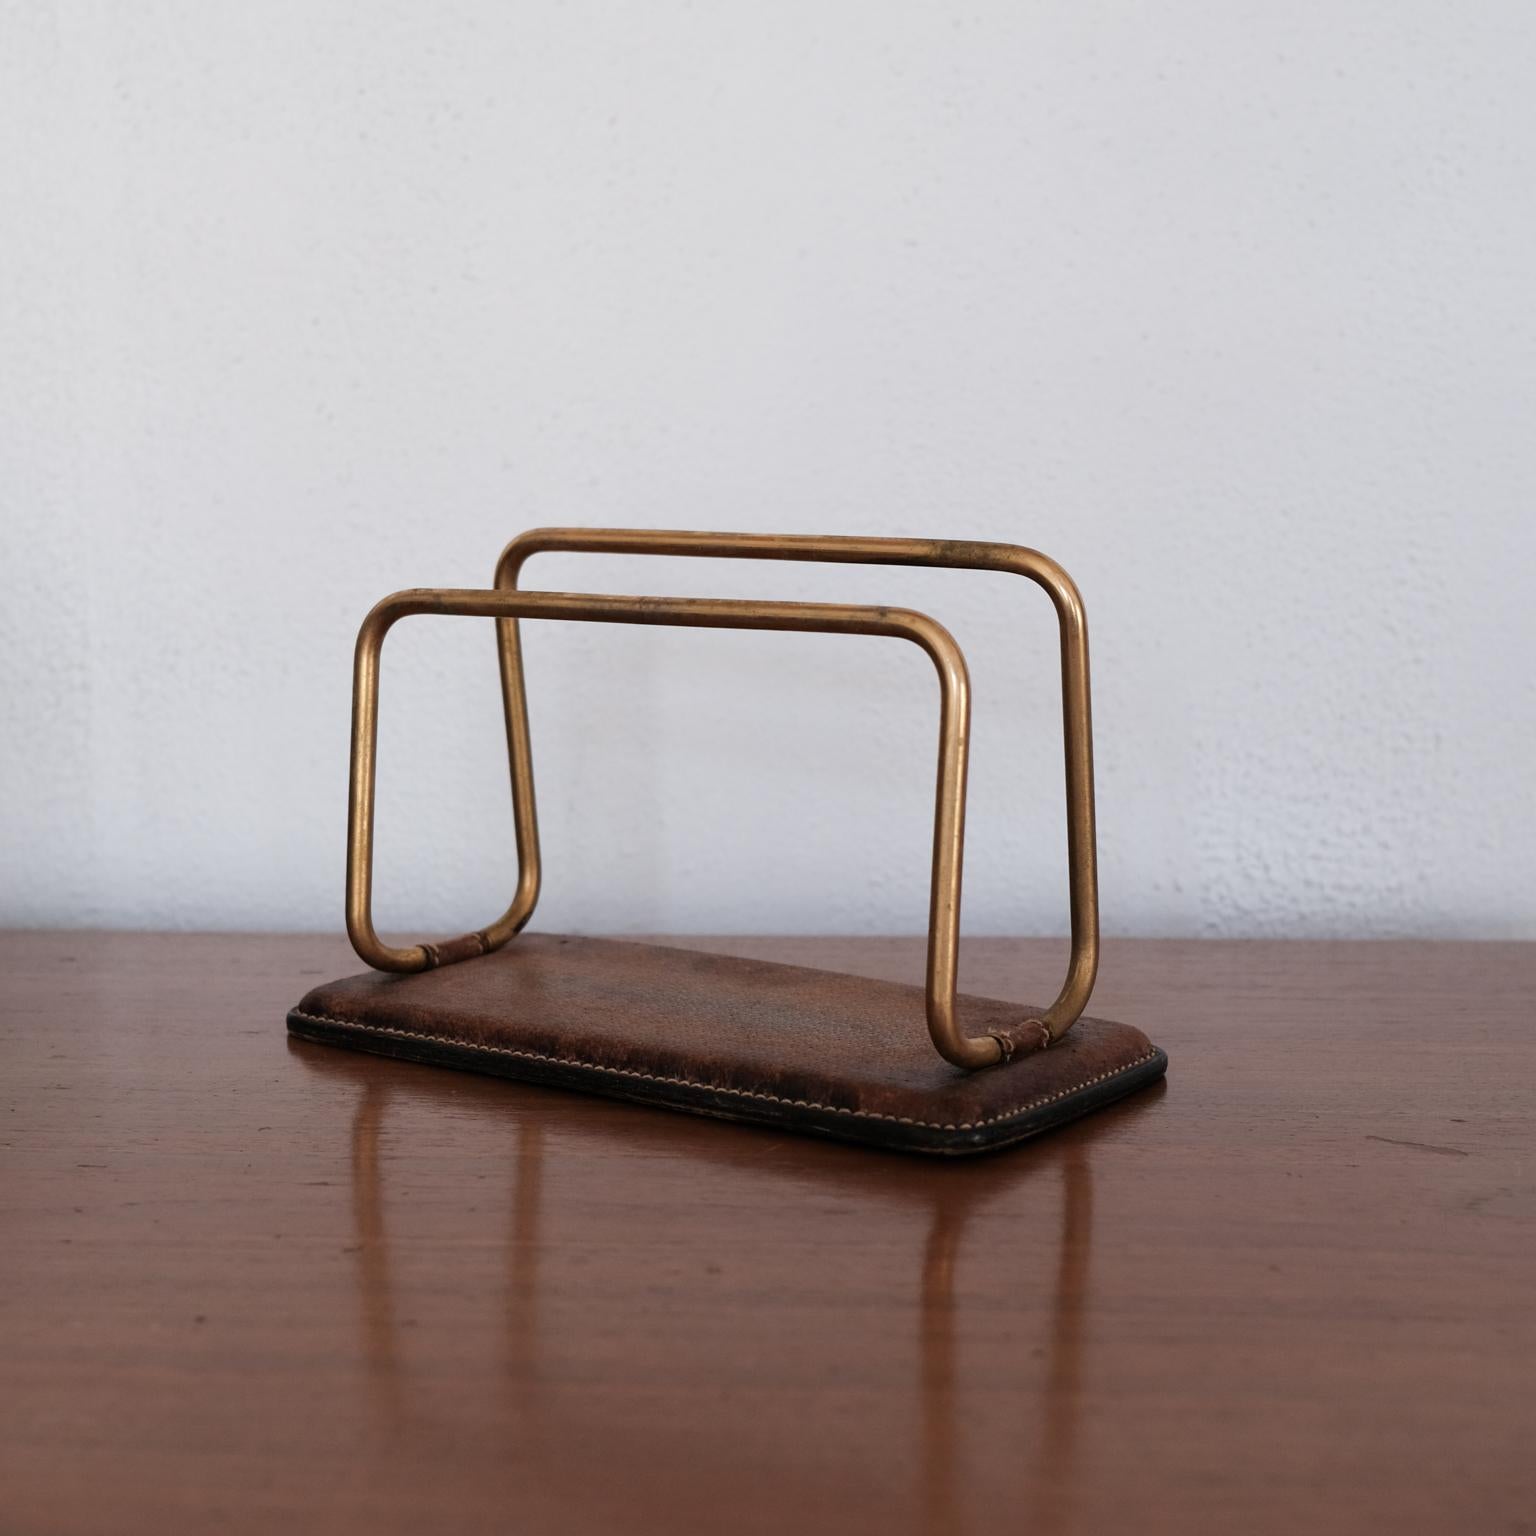 Italian Vintage Gucci Leather and Brass Letter Holder